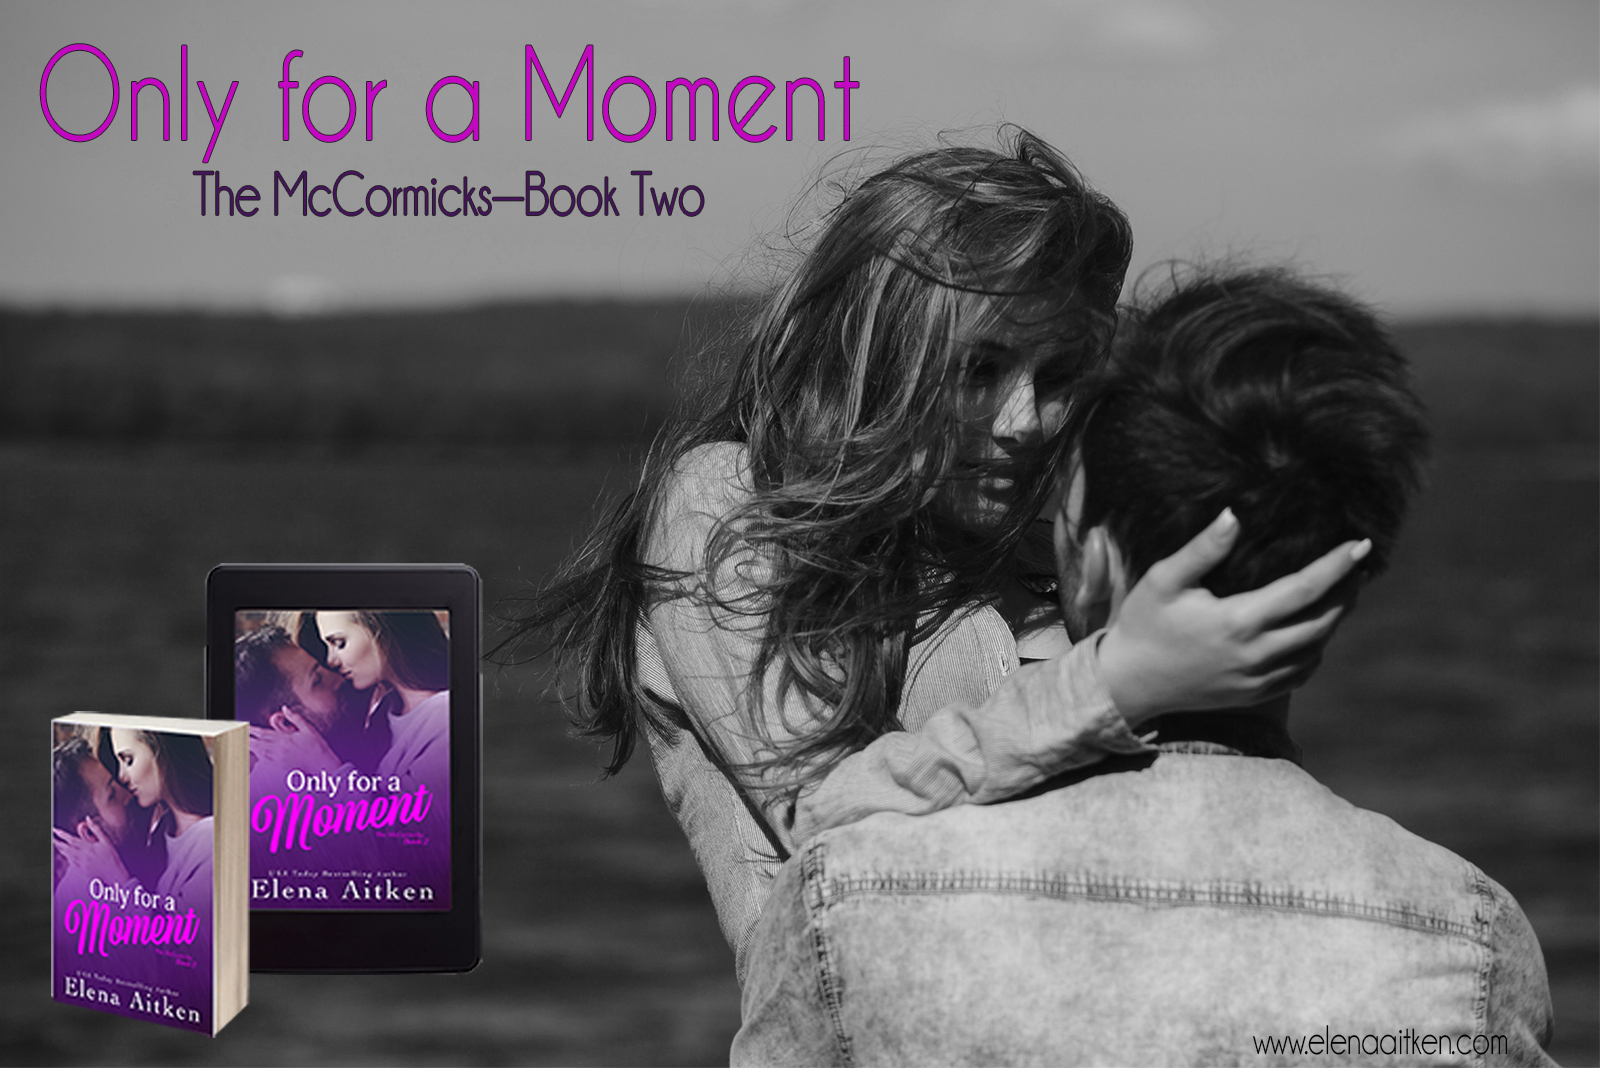 Only For A Moment is Available NOW!